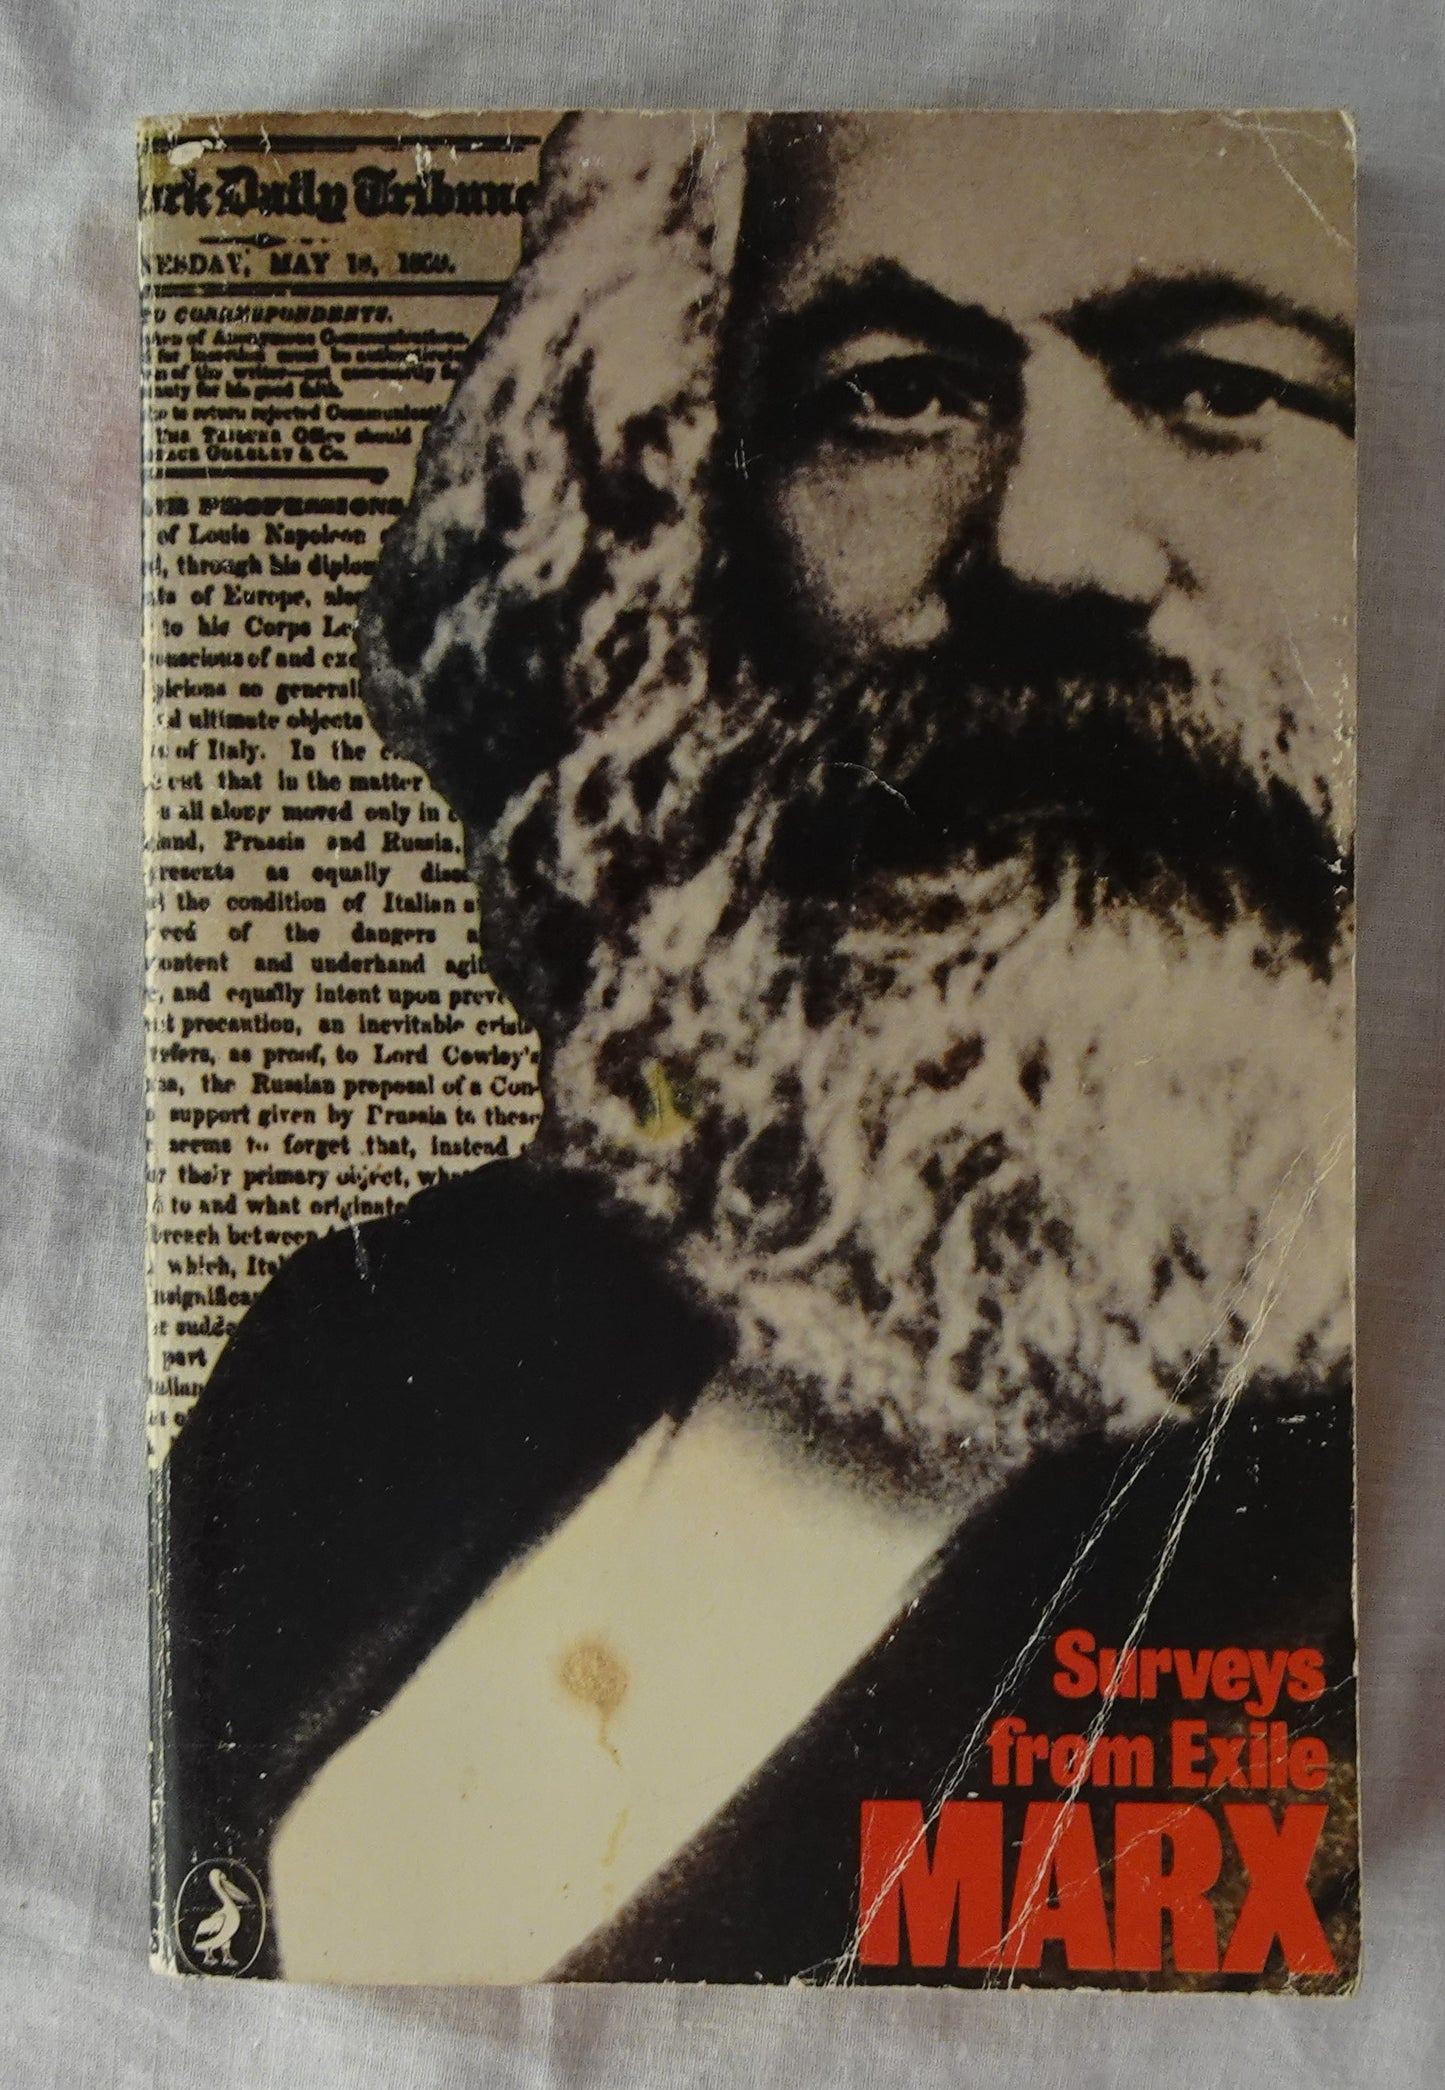 Surveys from Exile  Political Writings Volume 2  by Karl Marx  Edited by David Fernbach